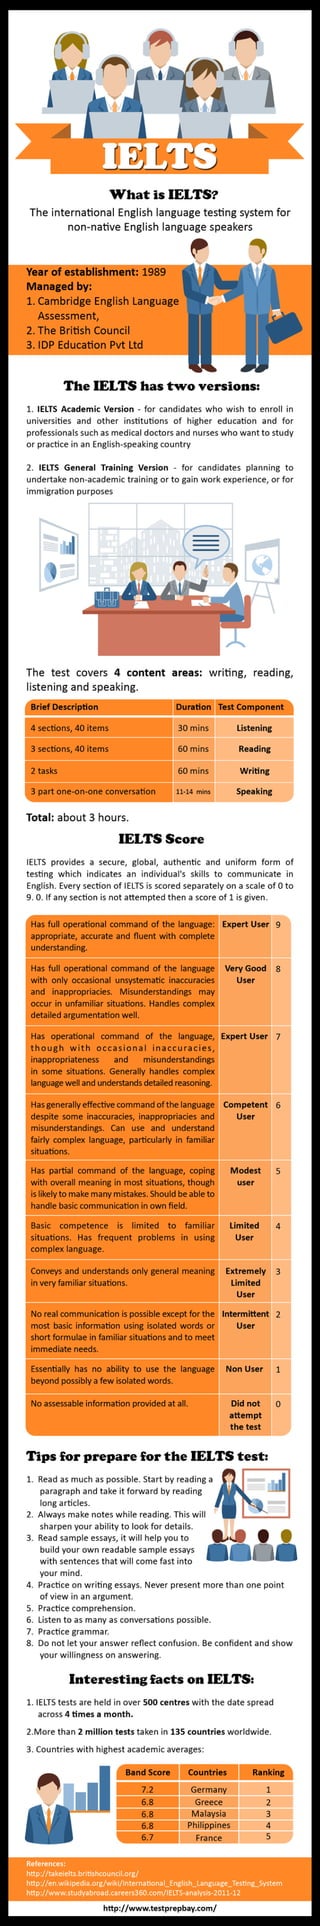 IELTS Tips and Tricks